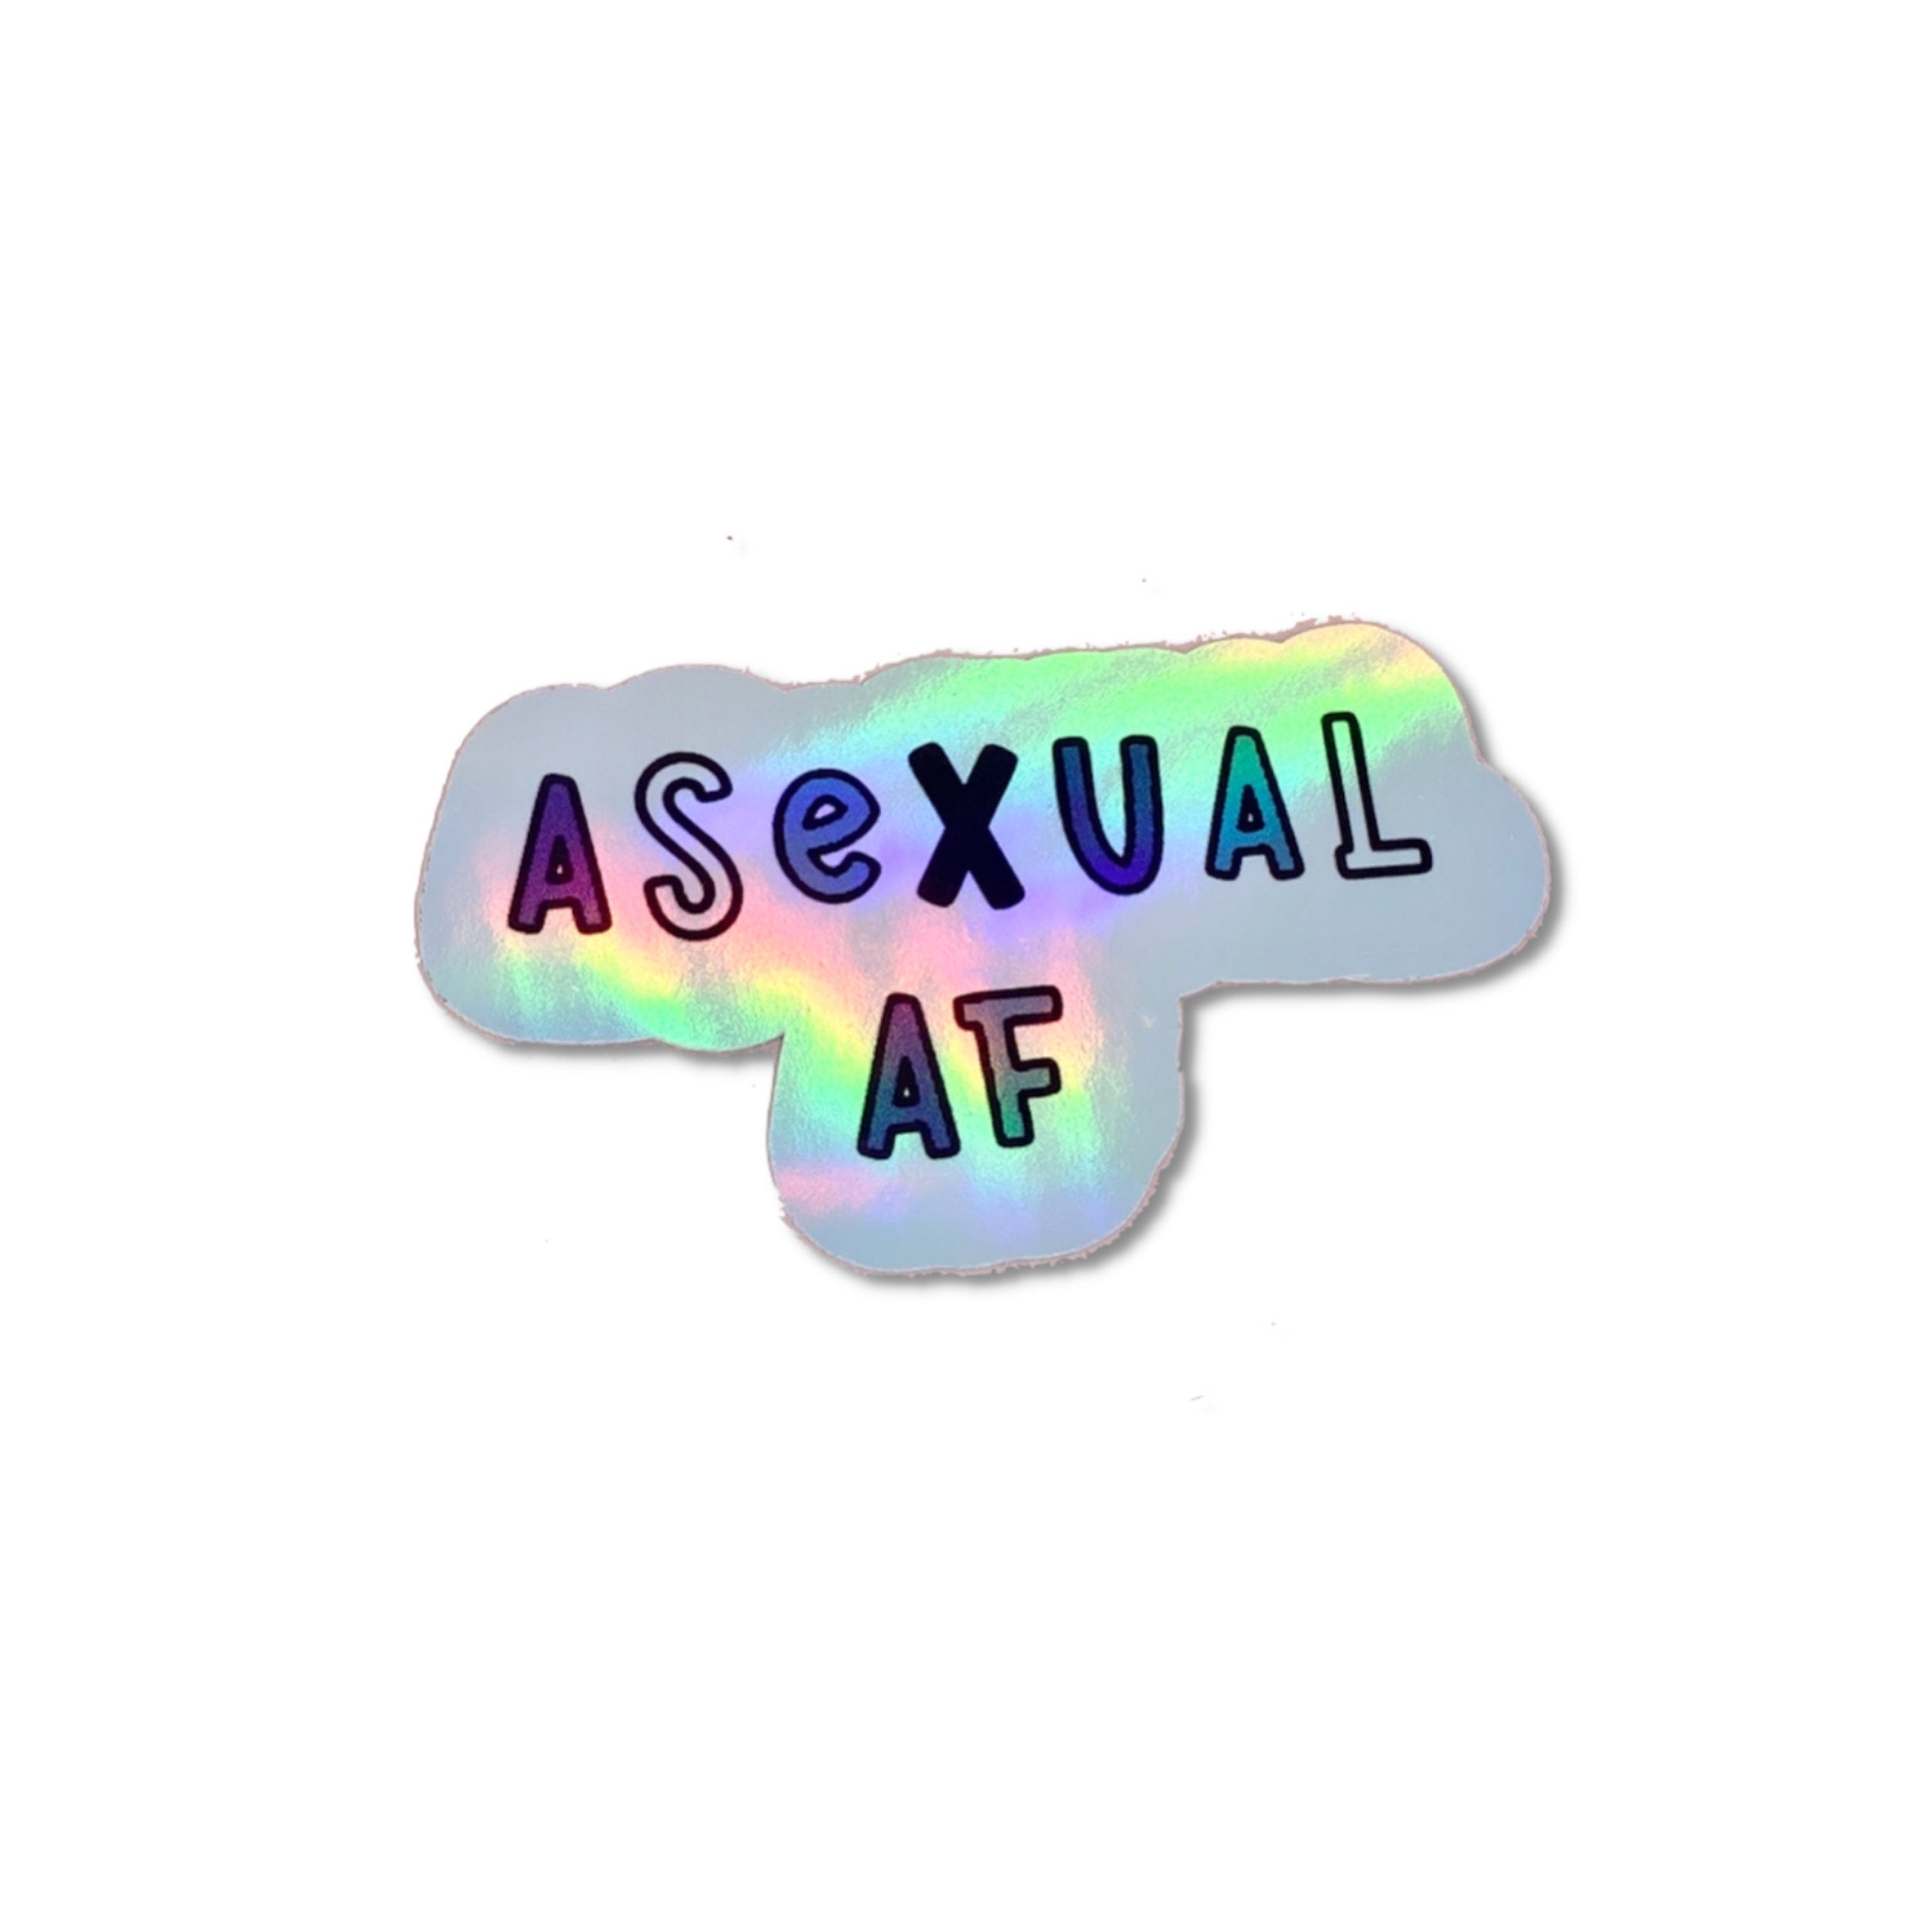 Asexual af holographic vinyl sticker